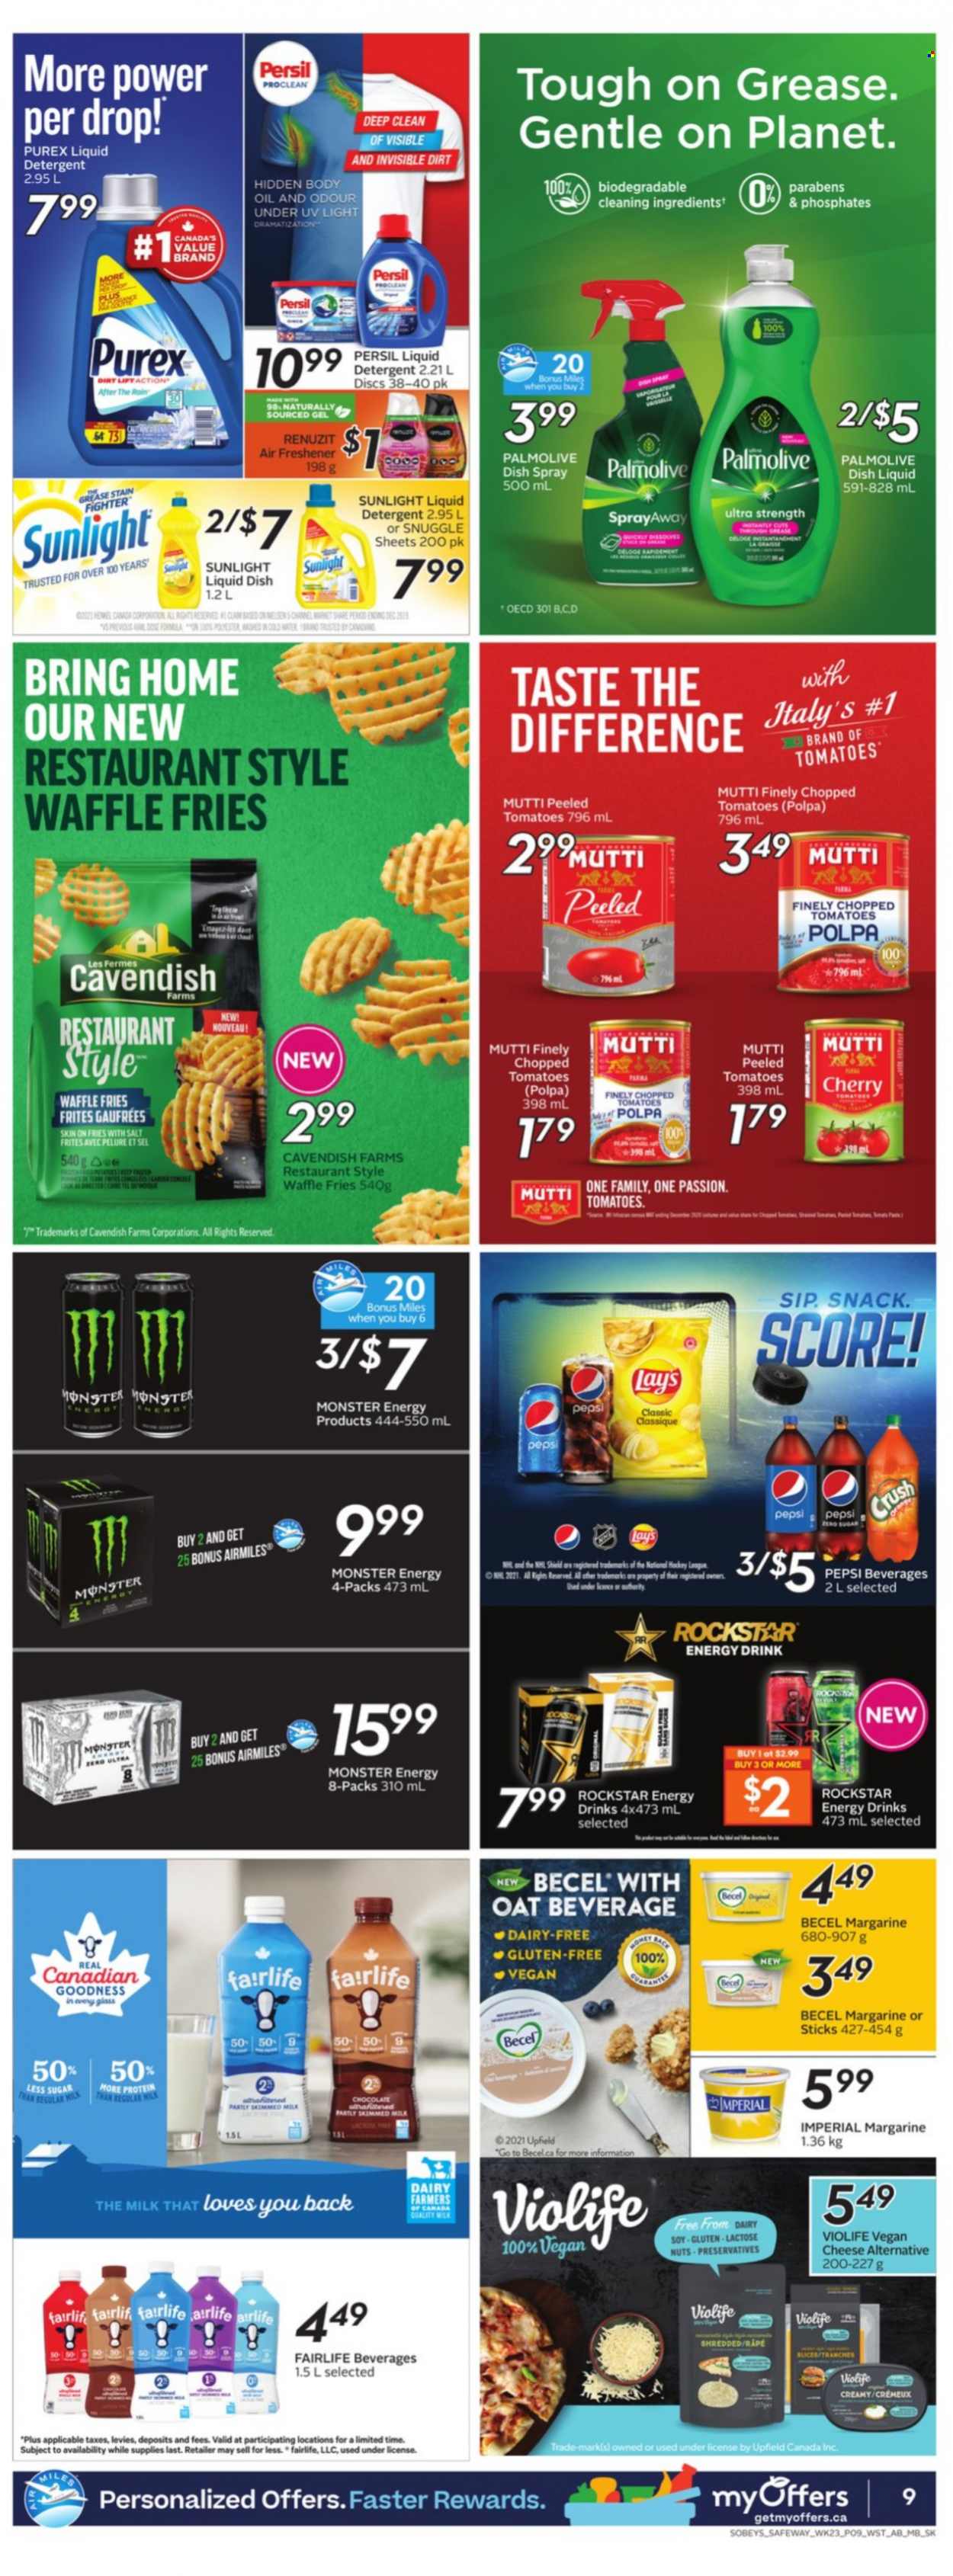 thumbnail - Safeway Flyer - September 30, 2021 - October 06, 2021 - Sales products - tomatoes, cherries, clams, cheese, margarine, potato fries, milk chocolate, chocolate, snack, Lay’s, oats, chopped tomatoes, Pepsi, energy drink, Monster, Monster Energy, Rockstar, Snuggle, Persil, liquid detergent, Sunlight, Purex, dishwashing liquid, Palmolive, Nana, body oil, detergent. Page 9.